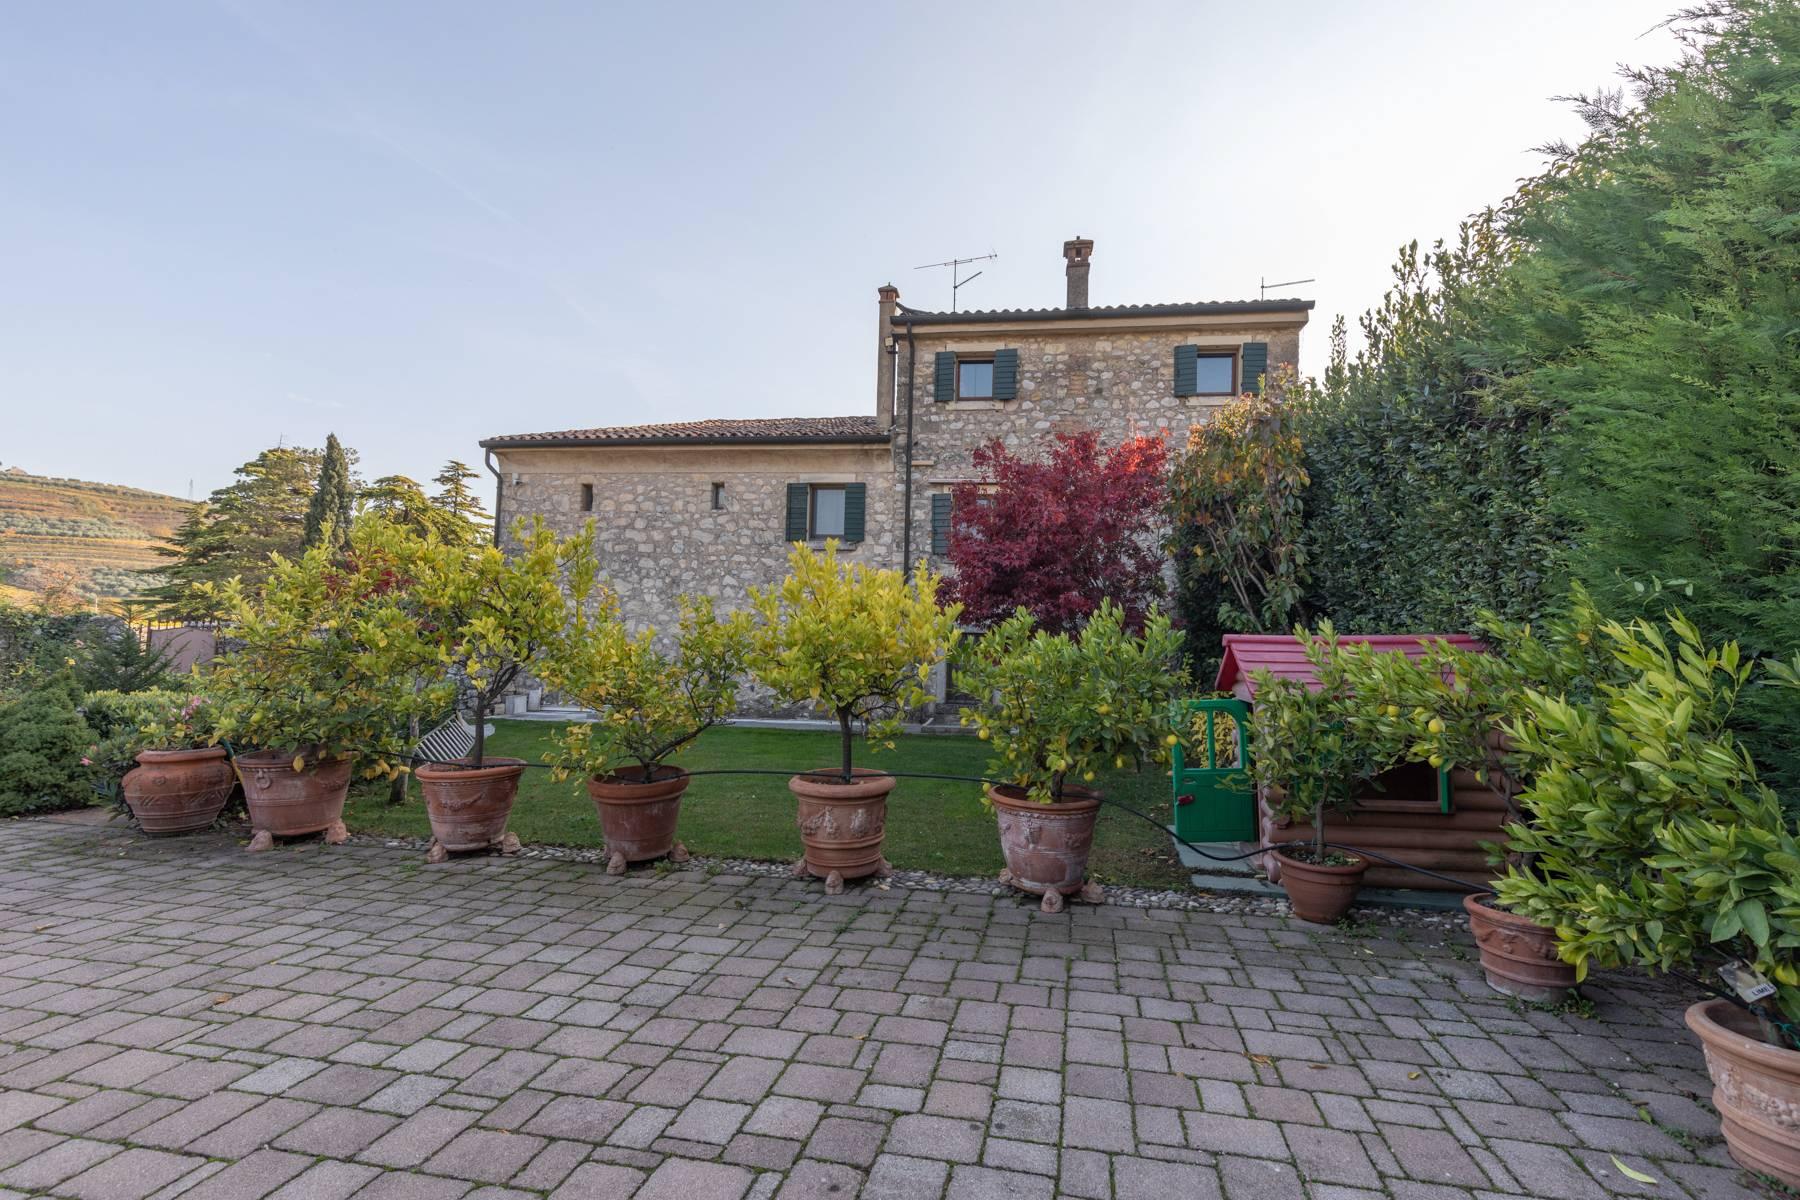 Stunning farmhouse surrounded by vineyards in the Valpolicella area - 31